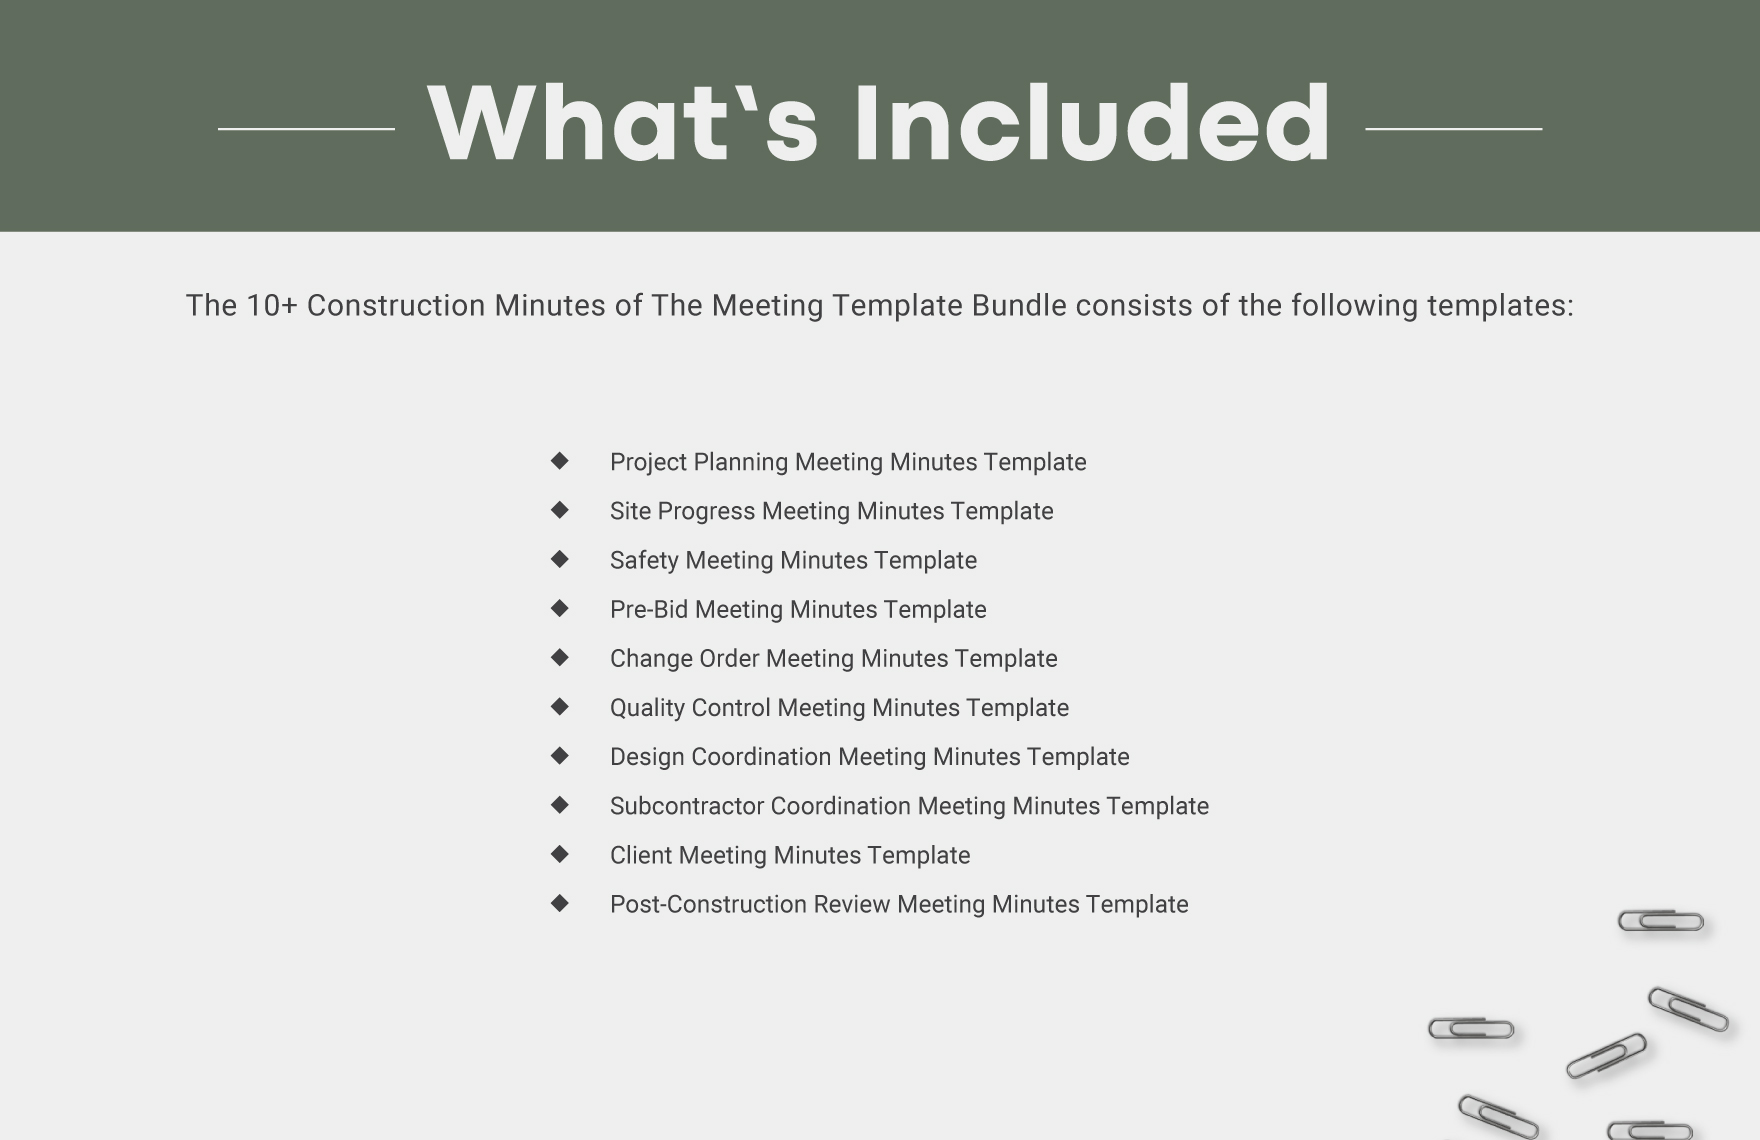 10+ Construction Minutes of The Meeting Template Bundle